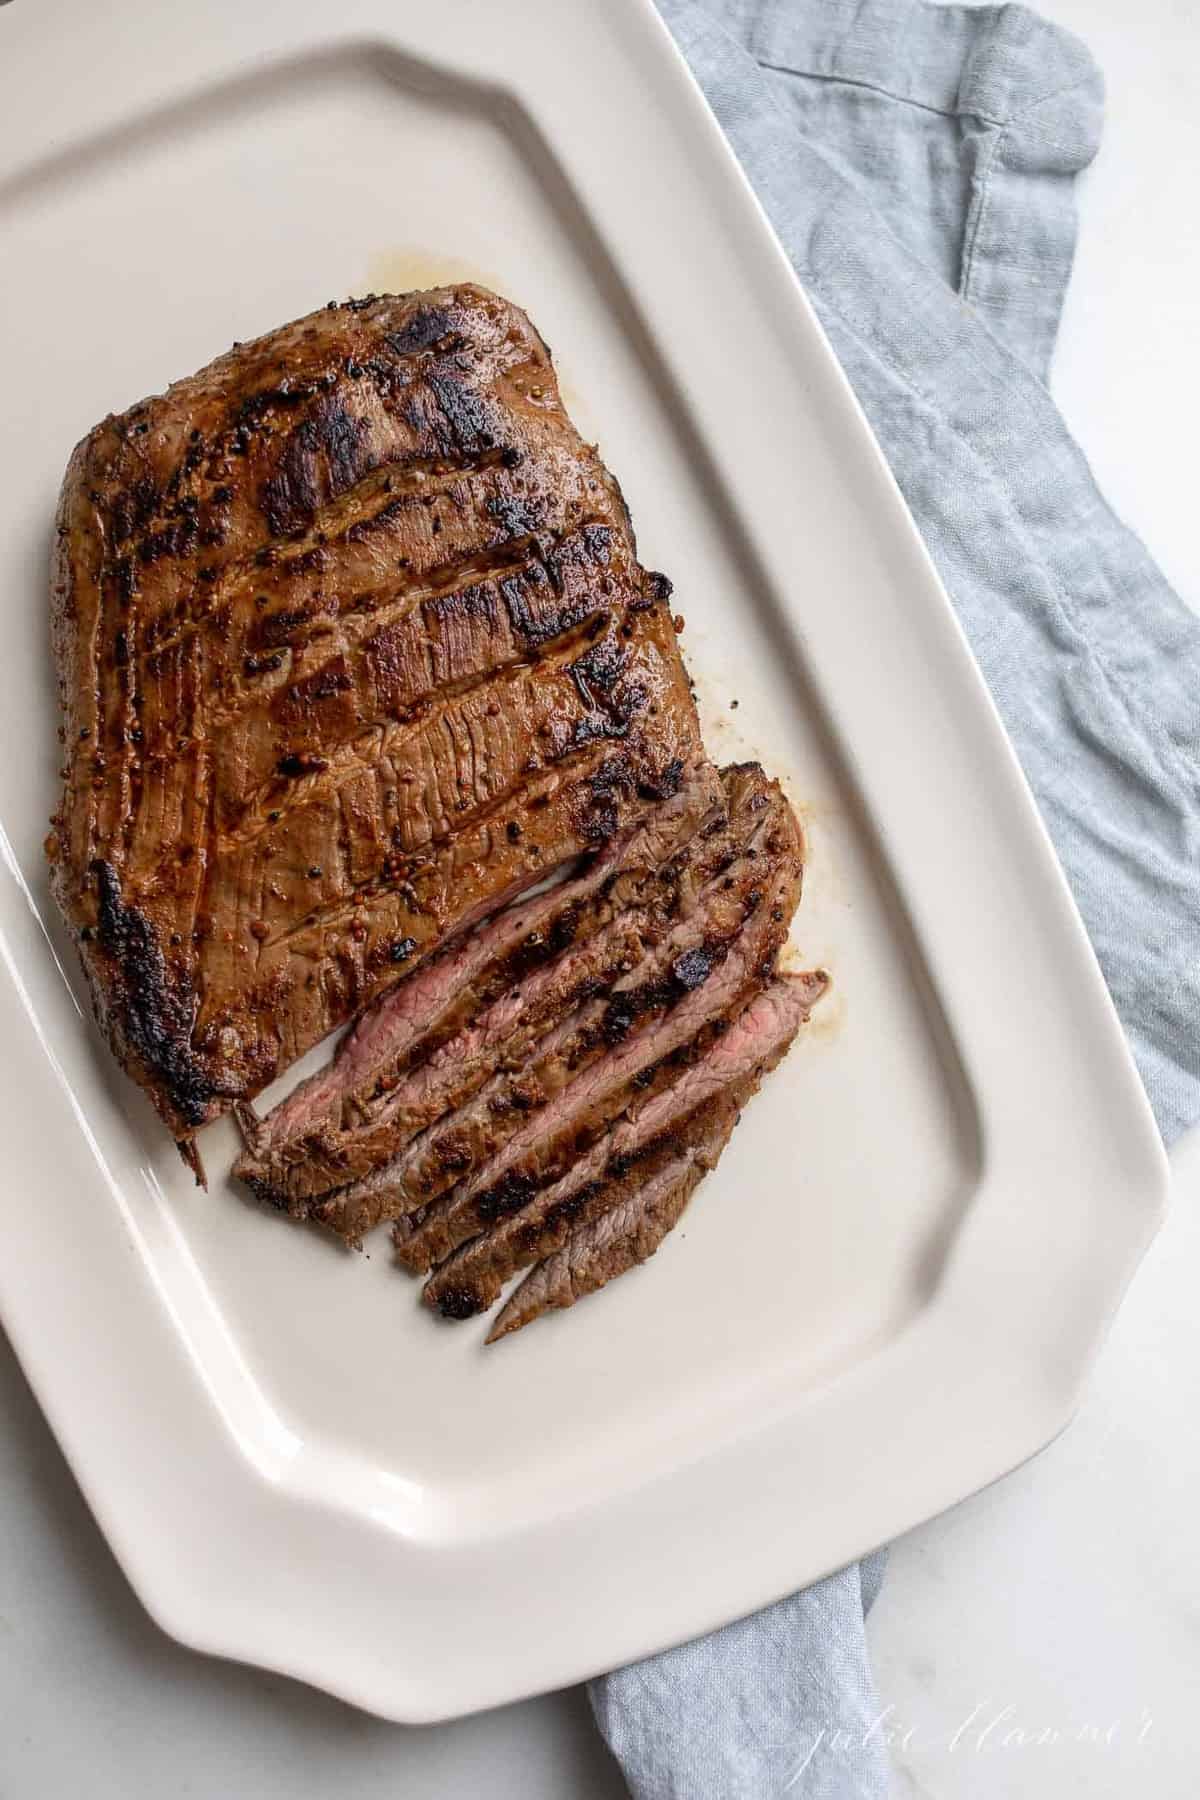 https://julieblanner.com/wp-content/uploads/2020/02/how-to-cook-steak-on-the-stove.jpg